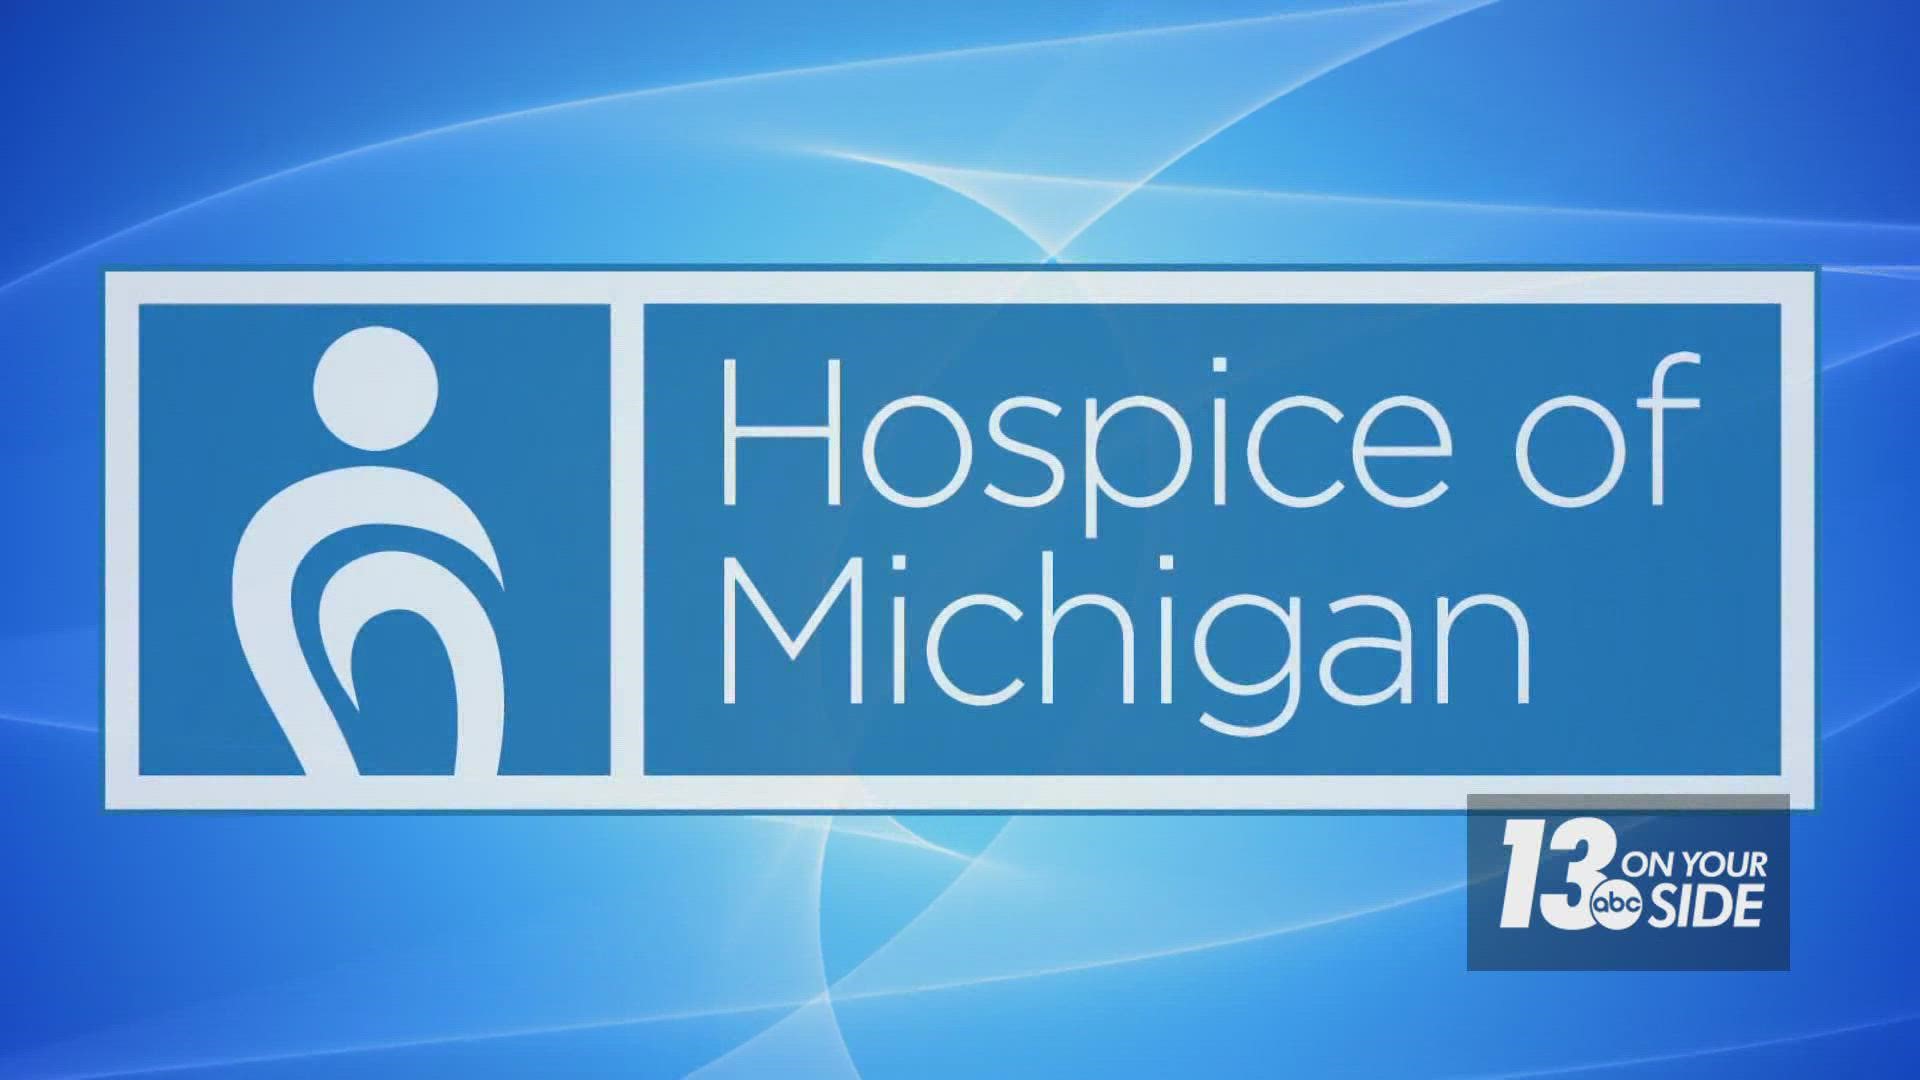 Hospice of Michigan is excited to return to in-person events with two exciting opportunities in the next few weeks.